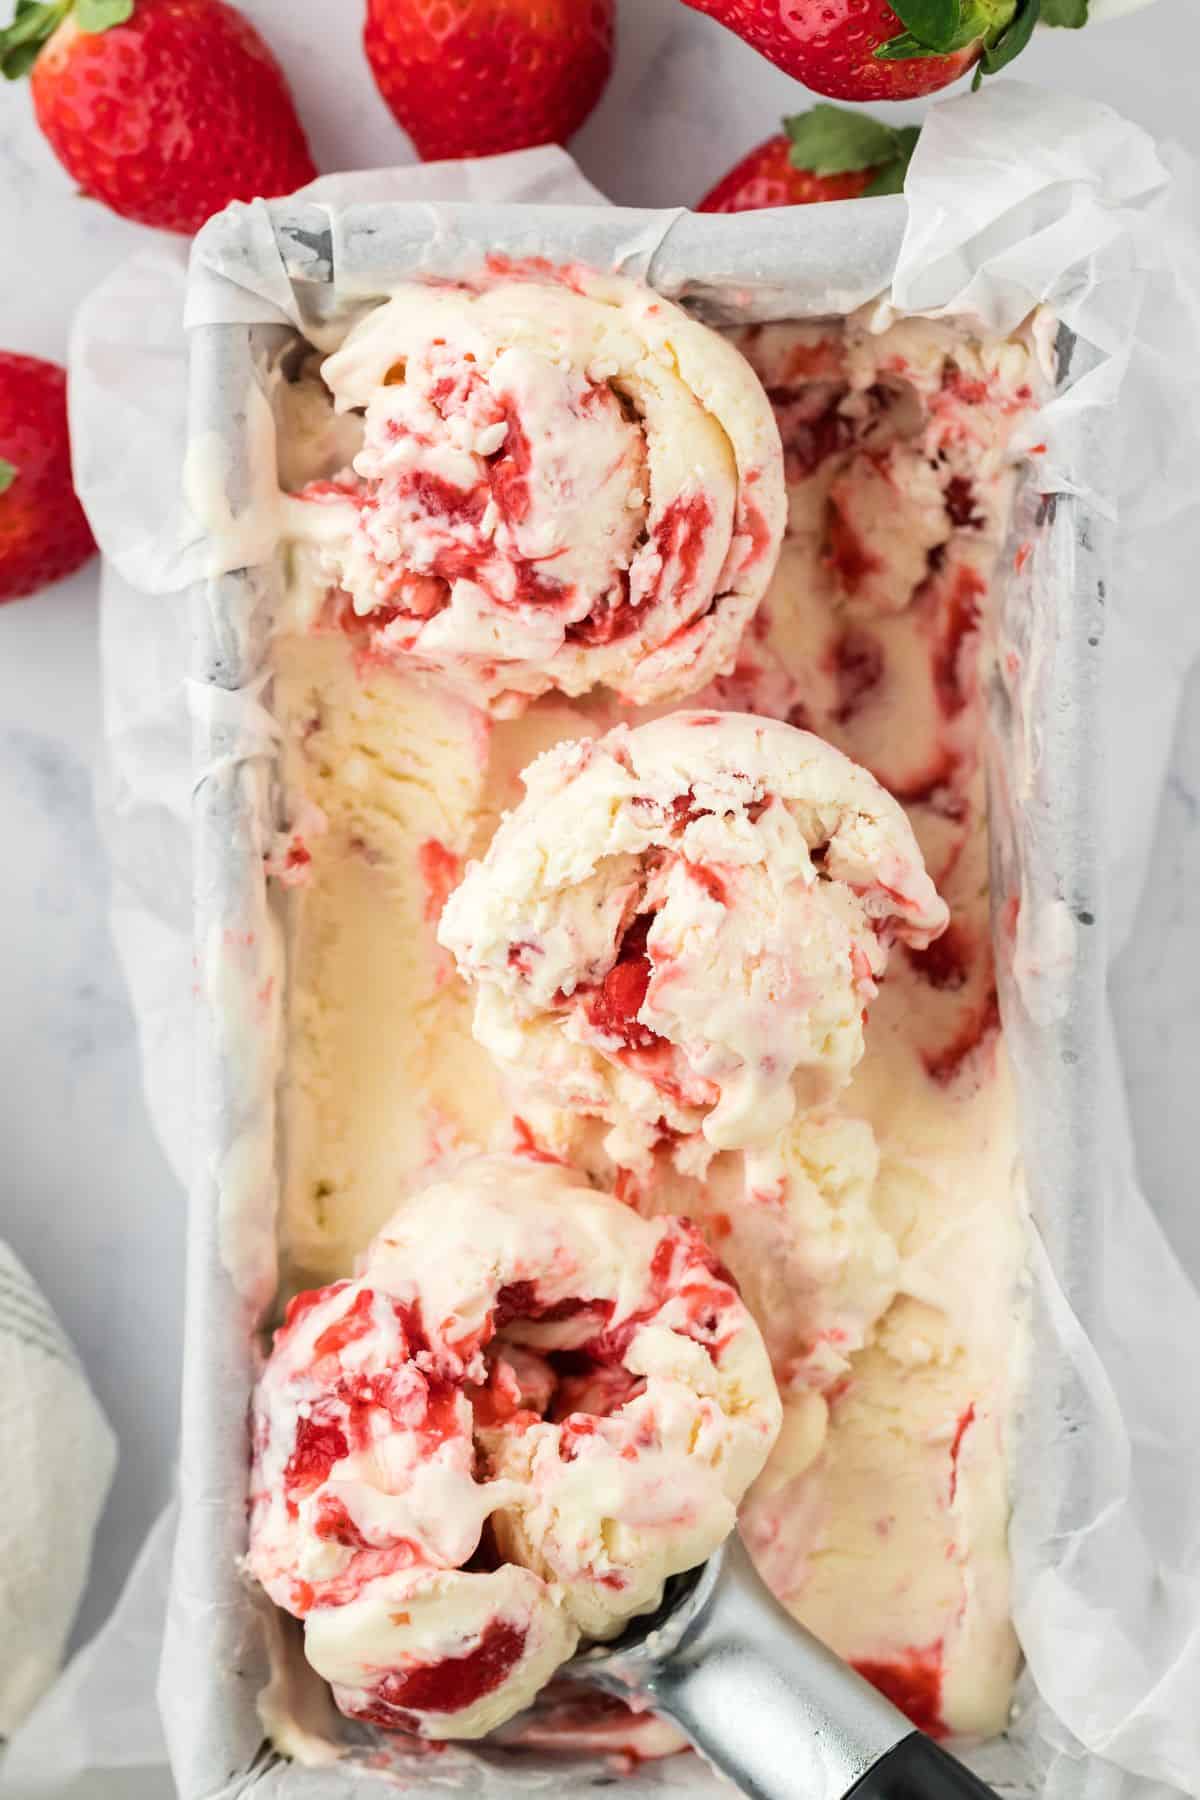 Strawberry Cheesecake Ice Cream in a loaf pan with scoops of ice cream on top and strawberries around the pan.